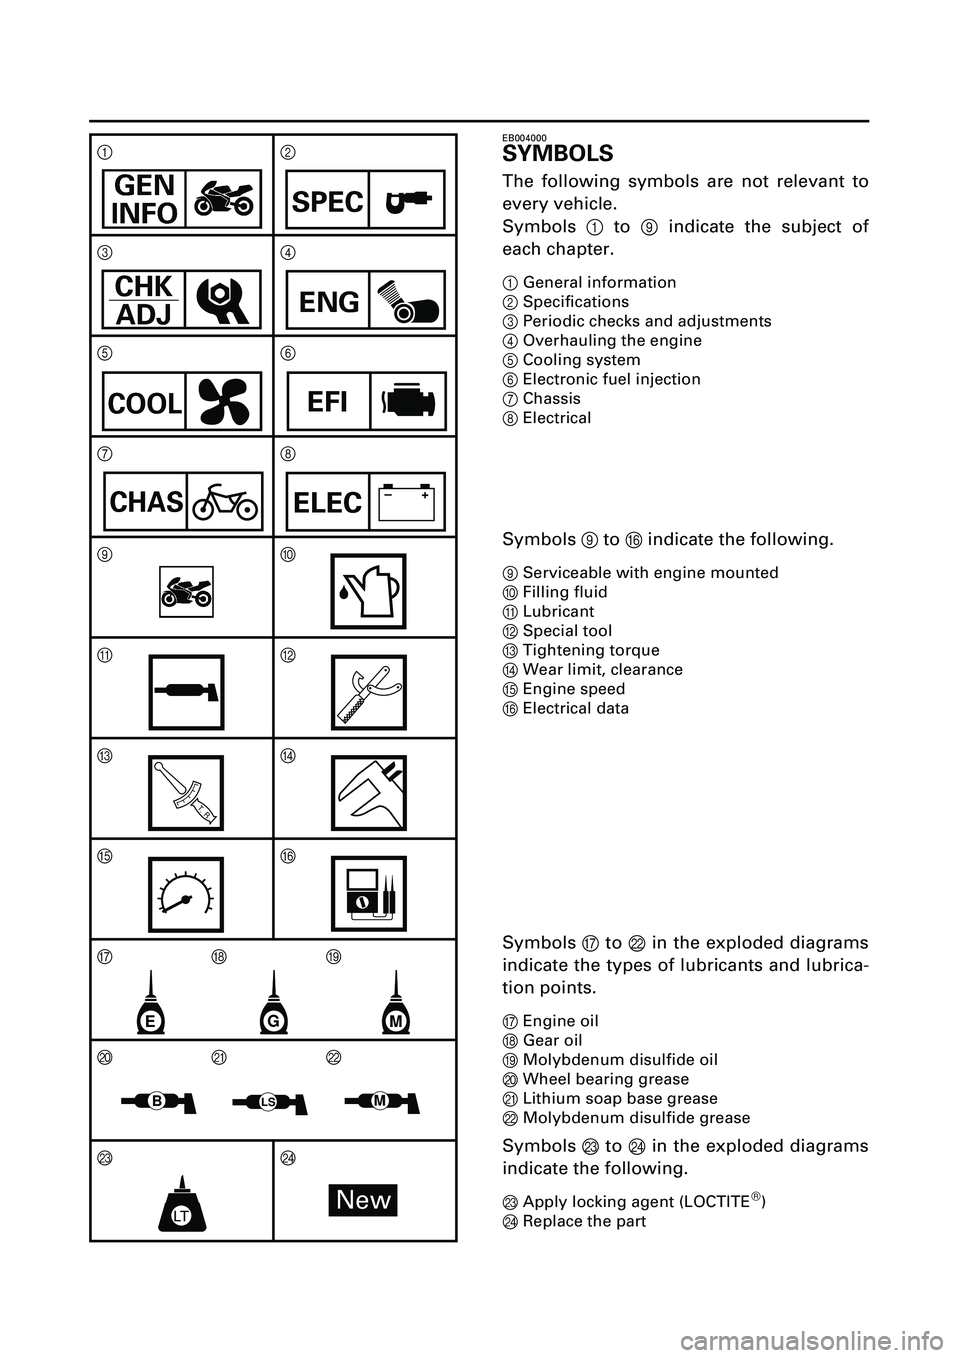 YAMAHA YZF-R7 1999  Owners Manual  
EB004000 
SYMBOLS 
The following symbols are not relevant to
every vehicle.
Symbols   
1  
 to   
9  
 indicate the subject of
each chapter. 
1  
General information  
2  
Specifications  
3  
Perio